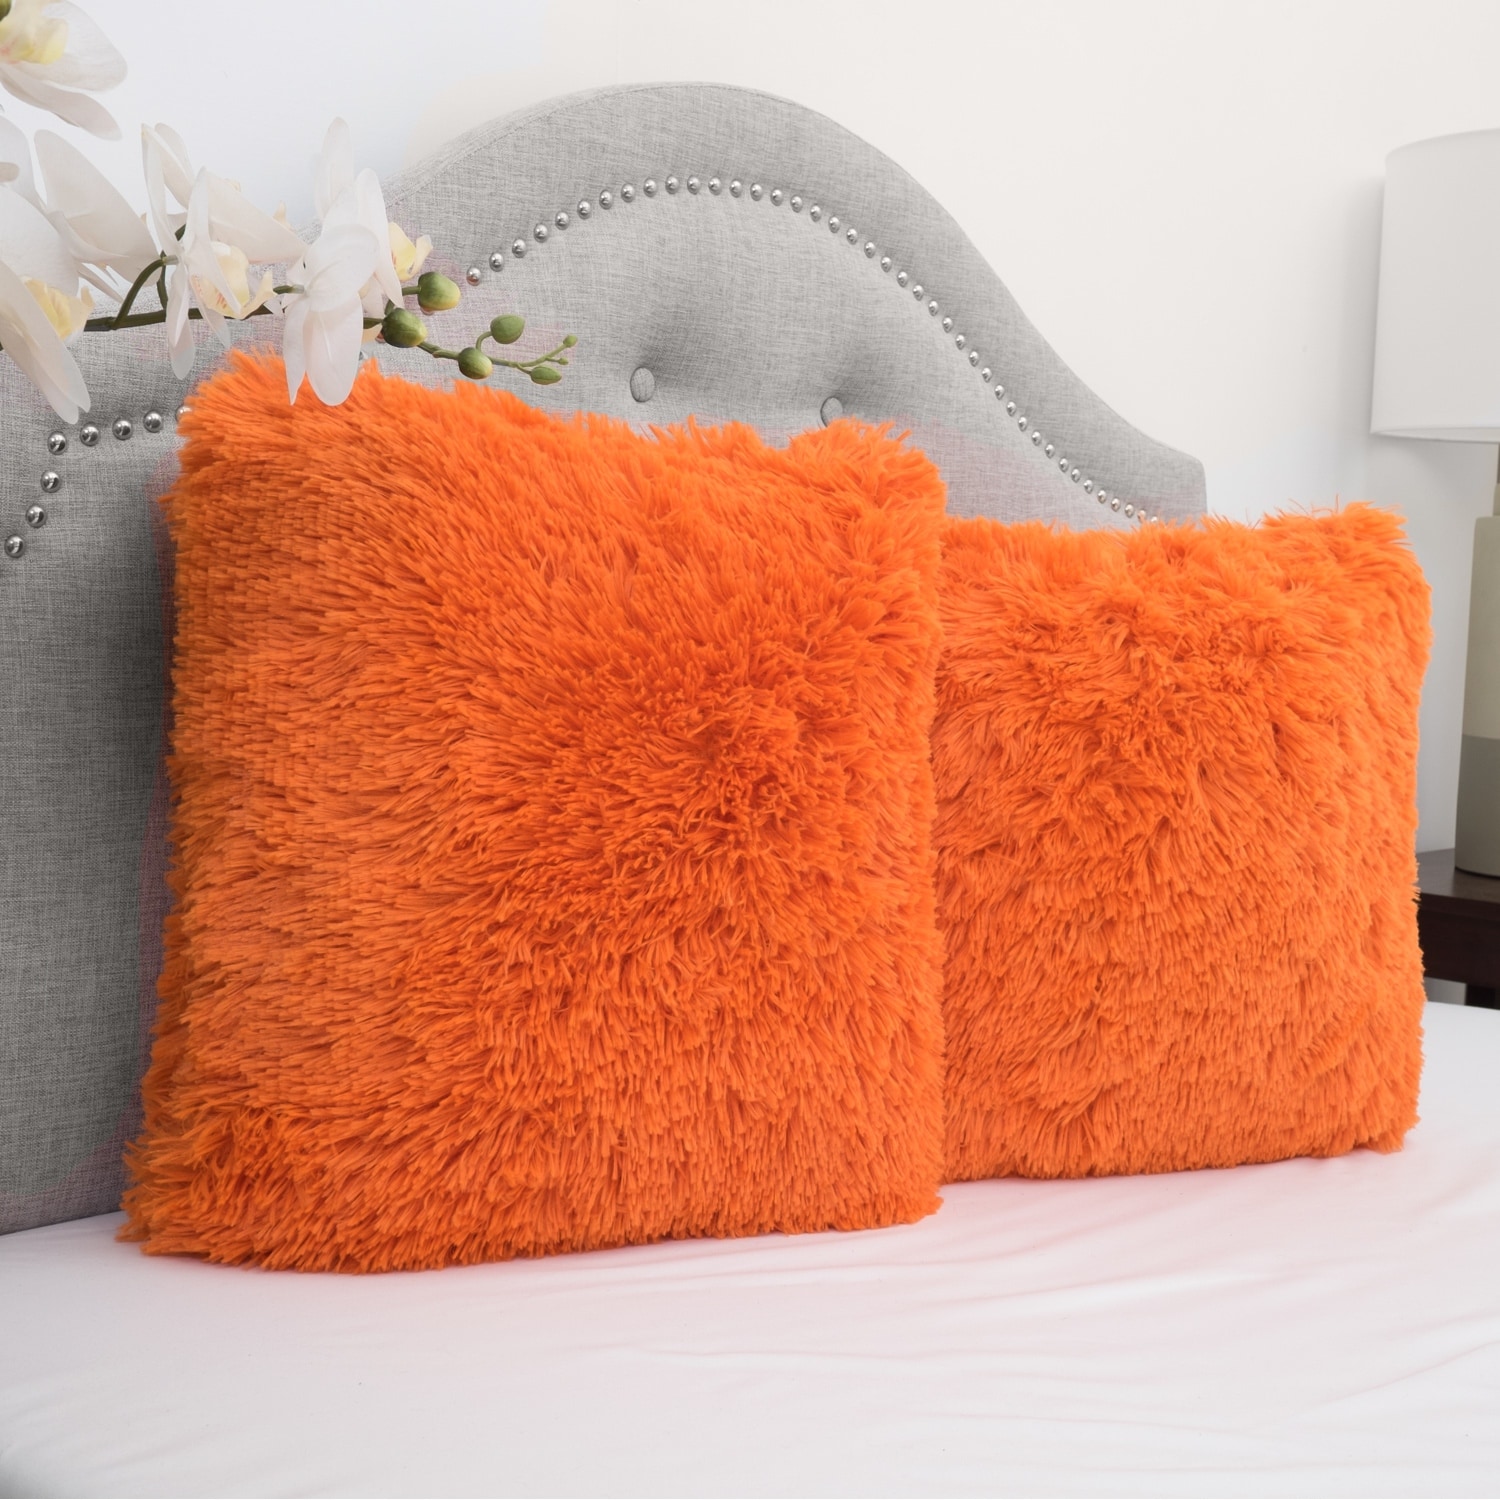 https://ak1.ostkcdn.com/images/products/is/images/direct/534ee68d634998c0734dd6d6018fb2079a852d1c/Colorful-Plush-2-Piece-Throw-Pillows-Set-%28Assorted-Colors%29.jpg